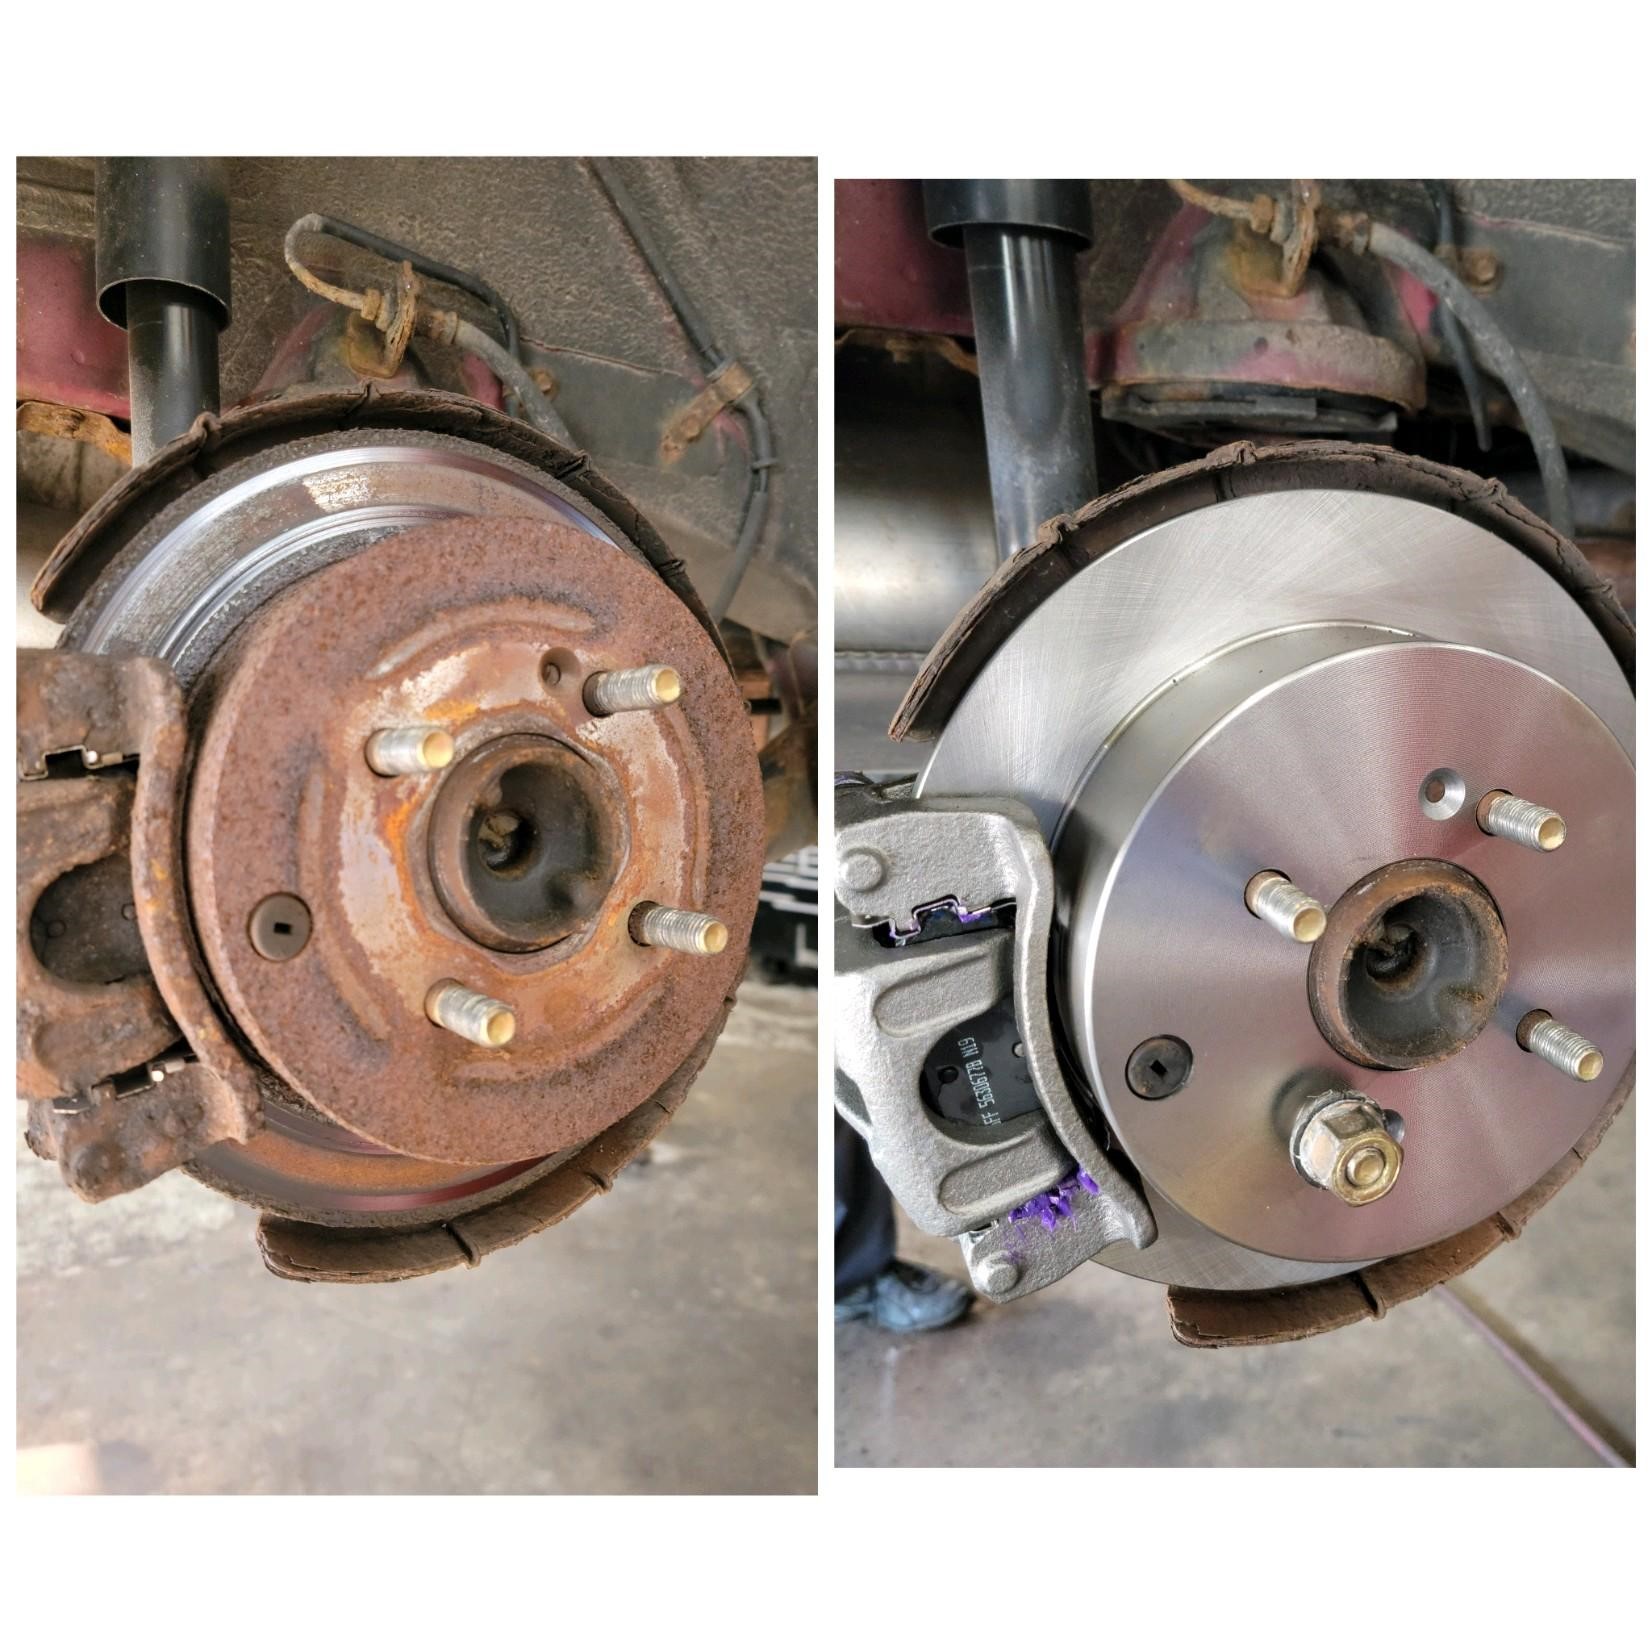 Why do my brakes make a grinding noise?